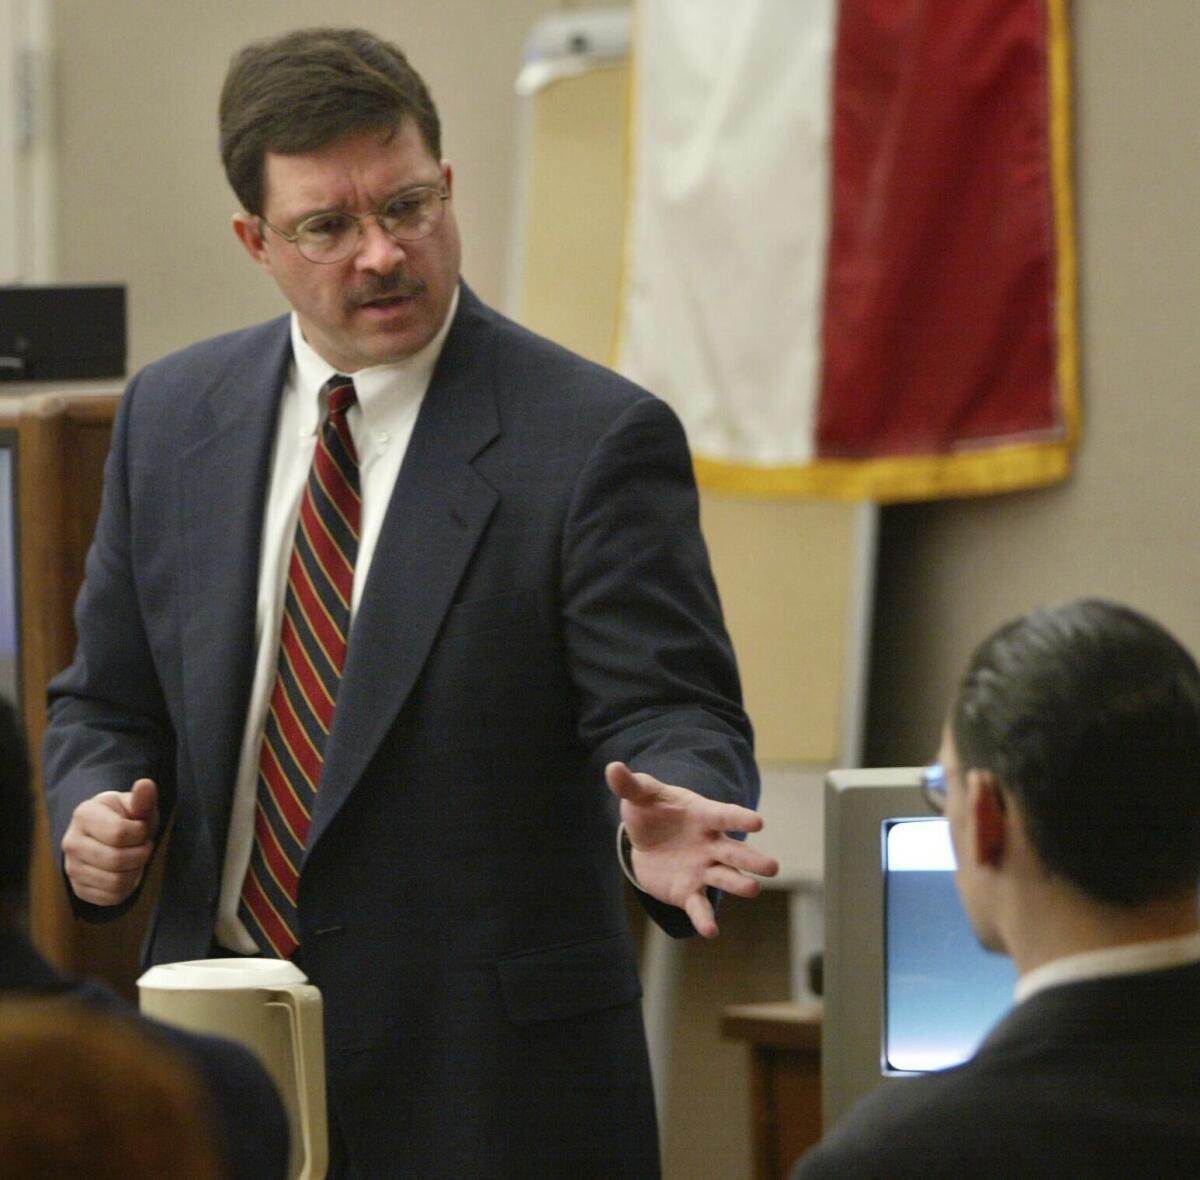 Prosecution attorney Rick Jackson, left, makes his closing arguments in front of Donald Newbury during Newbury's capital murder trial on Friday, Jan. 18, 2002 in Dallas. The former Dallas County prosecutor has surrendered his law license after the State Bar of Texas said he withheld evidence that led to the wrongful convictions of two men who spent 14 years in prison in the fatal stabbing of a pastor. (Andy Scott/The Dallas Morning News via AP, file)